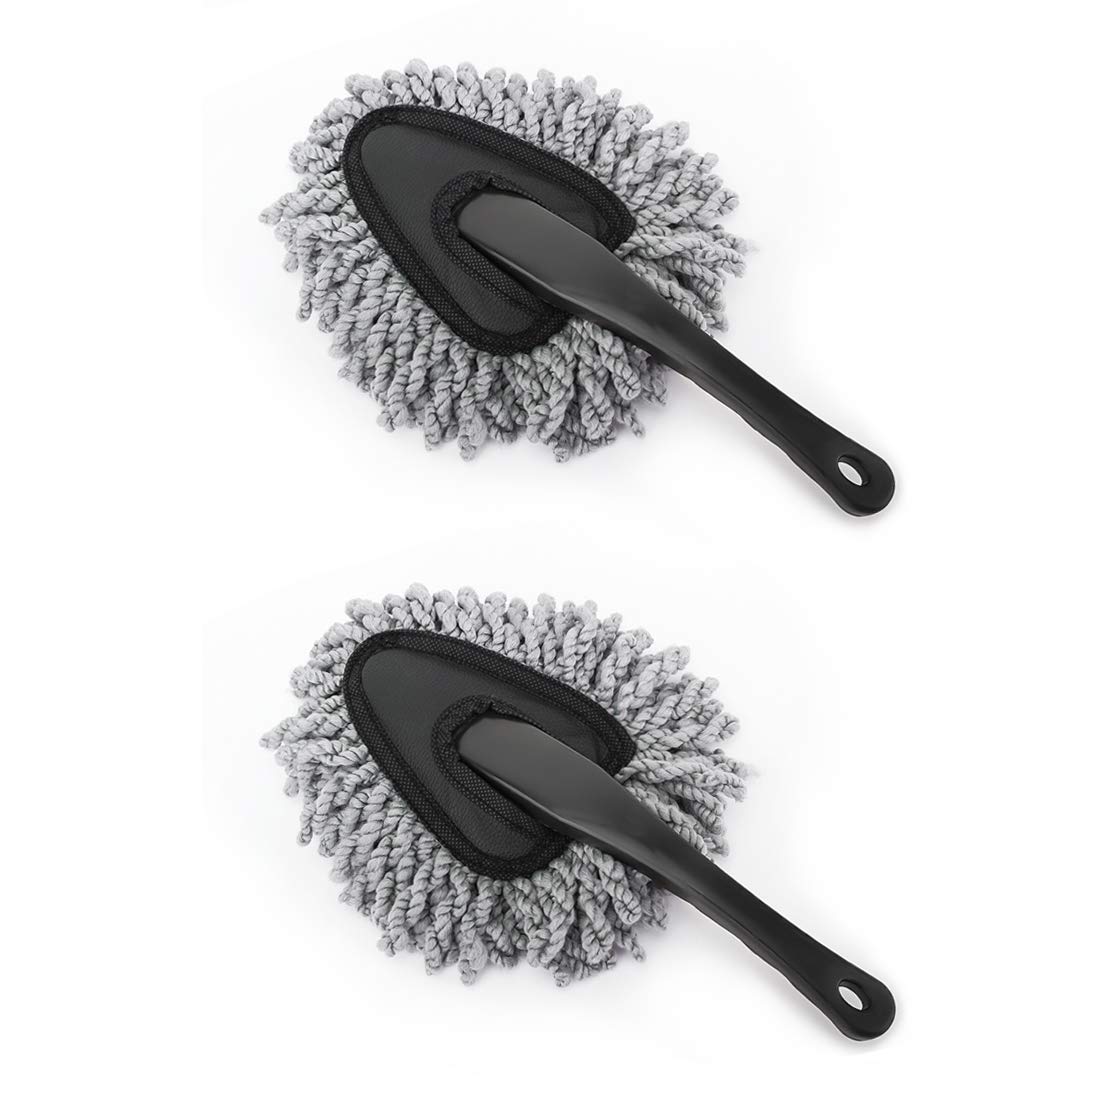 MoKo Car Duster, 2 Pack Super Soft Microfiber Car Dash Duster Detail Brush Set Interior Exterior Cleaning Dusting and Washing Tool for Car Motorcycle Automotive Dashboard Air Vents - Blue von MoKo